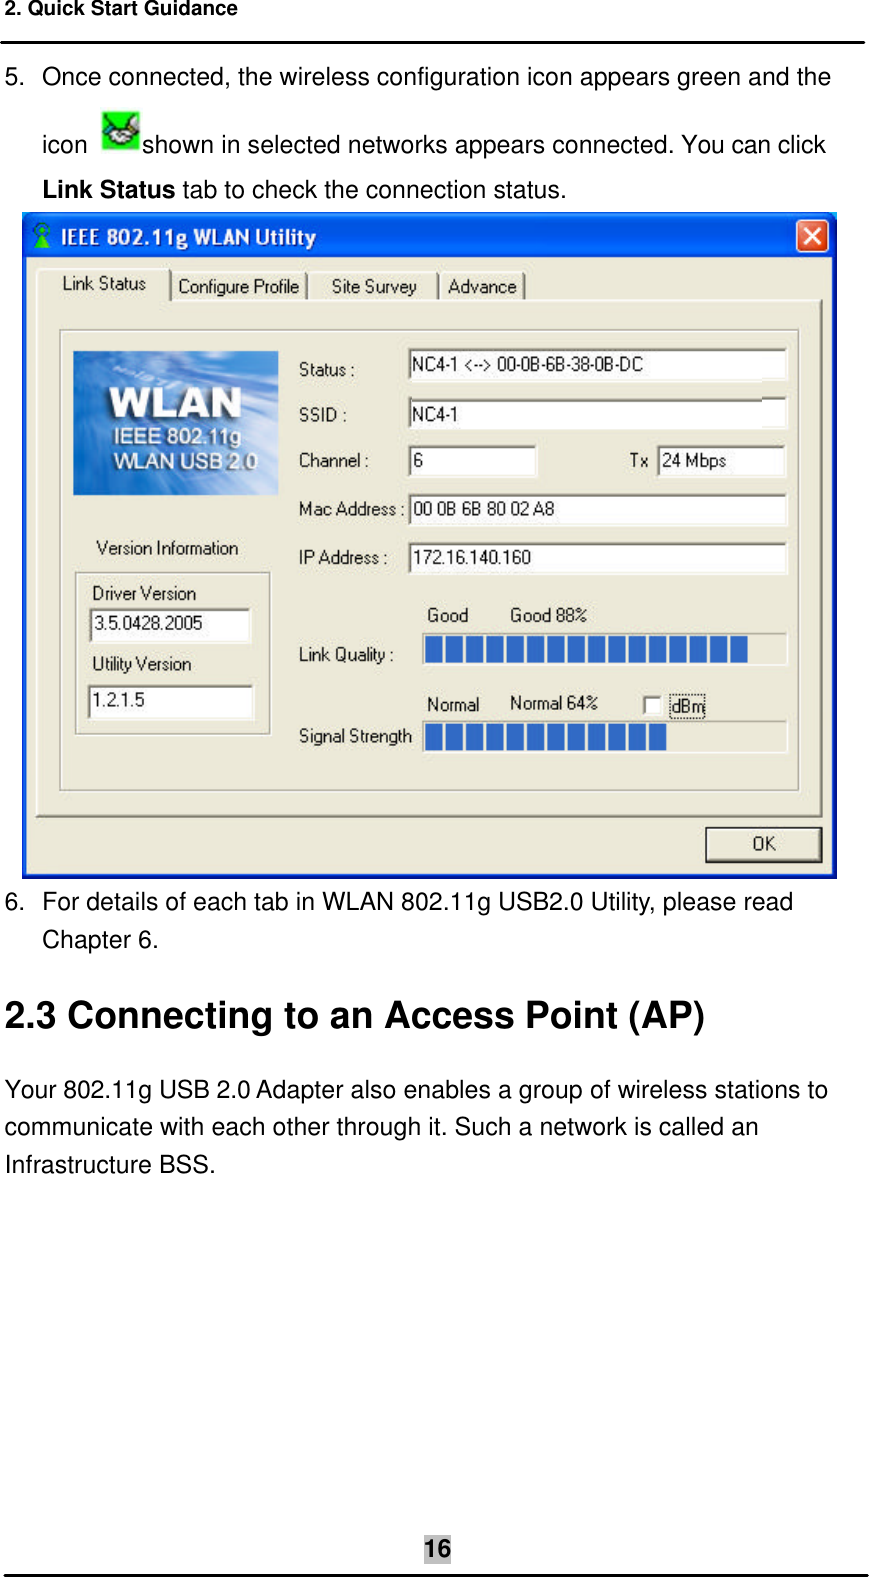 2. Quick Start Guidance    165. Once connected, the wireless configuration icon appears green and the icon  shown in selected networks appears connected. You can click Link Status tab to check the connection status.   6. For details of each tab in WLAN 802.11g USB2.0 Utility, please read  Chapter 6. 2.3 Connecting to an Access Point (AP) Your 802.11g USB 2.0 Adapter also enables a group of wireless stations to communicate with each other through it. Such a network is called an Infrastructure BSS.  